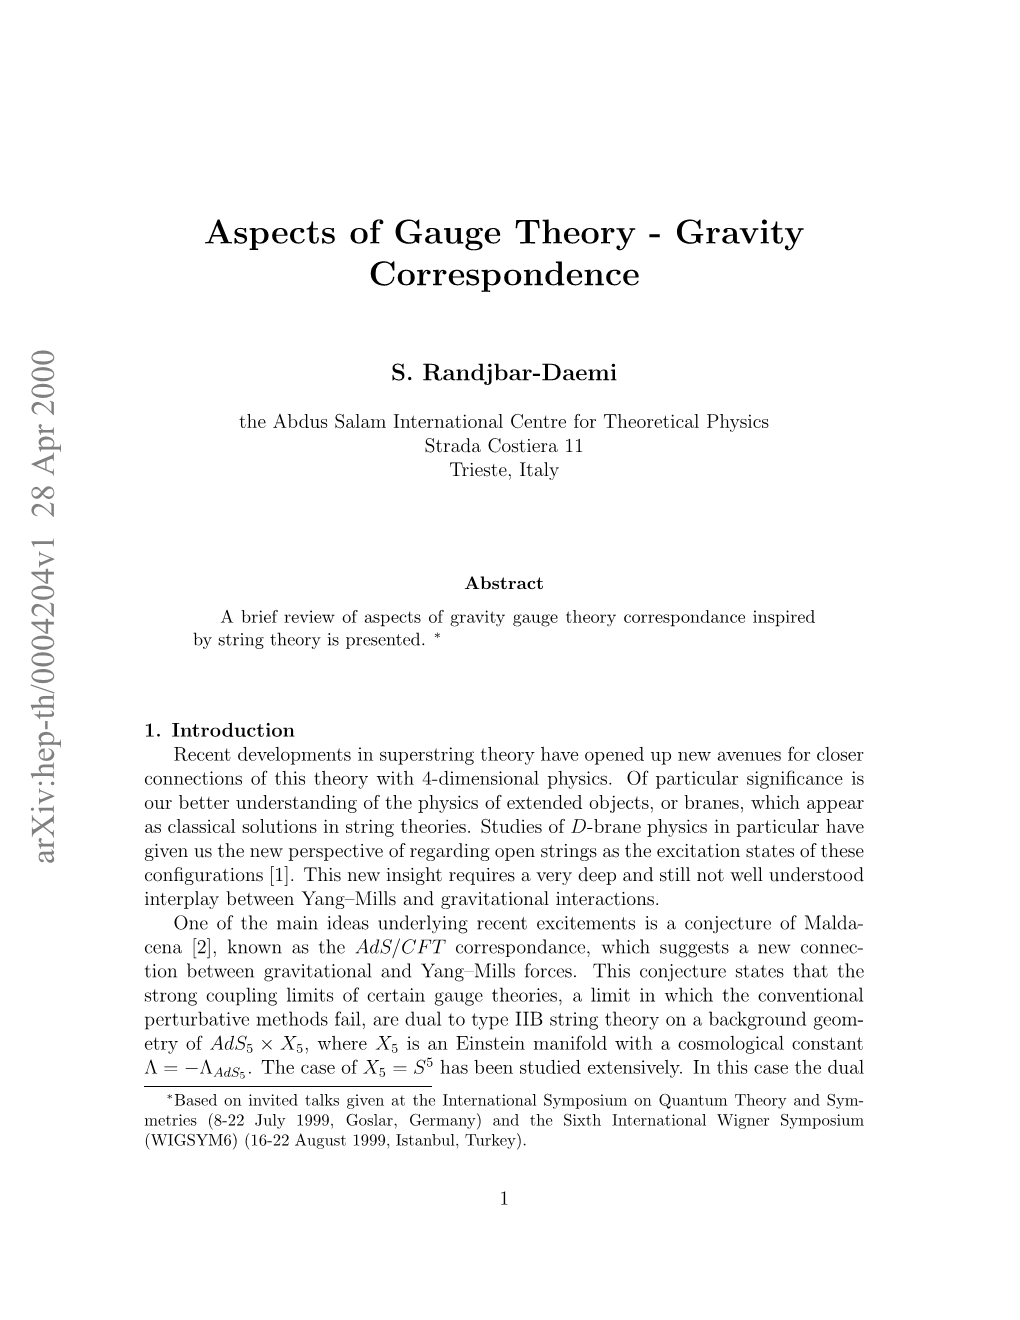 Aspects of Gauge Theory-Gravity Correspondence